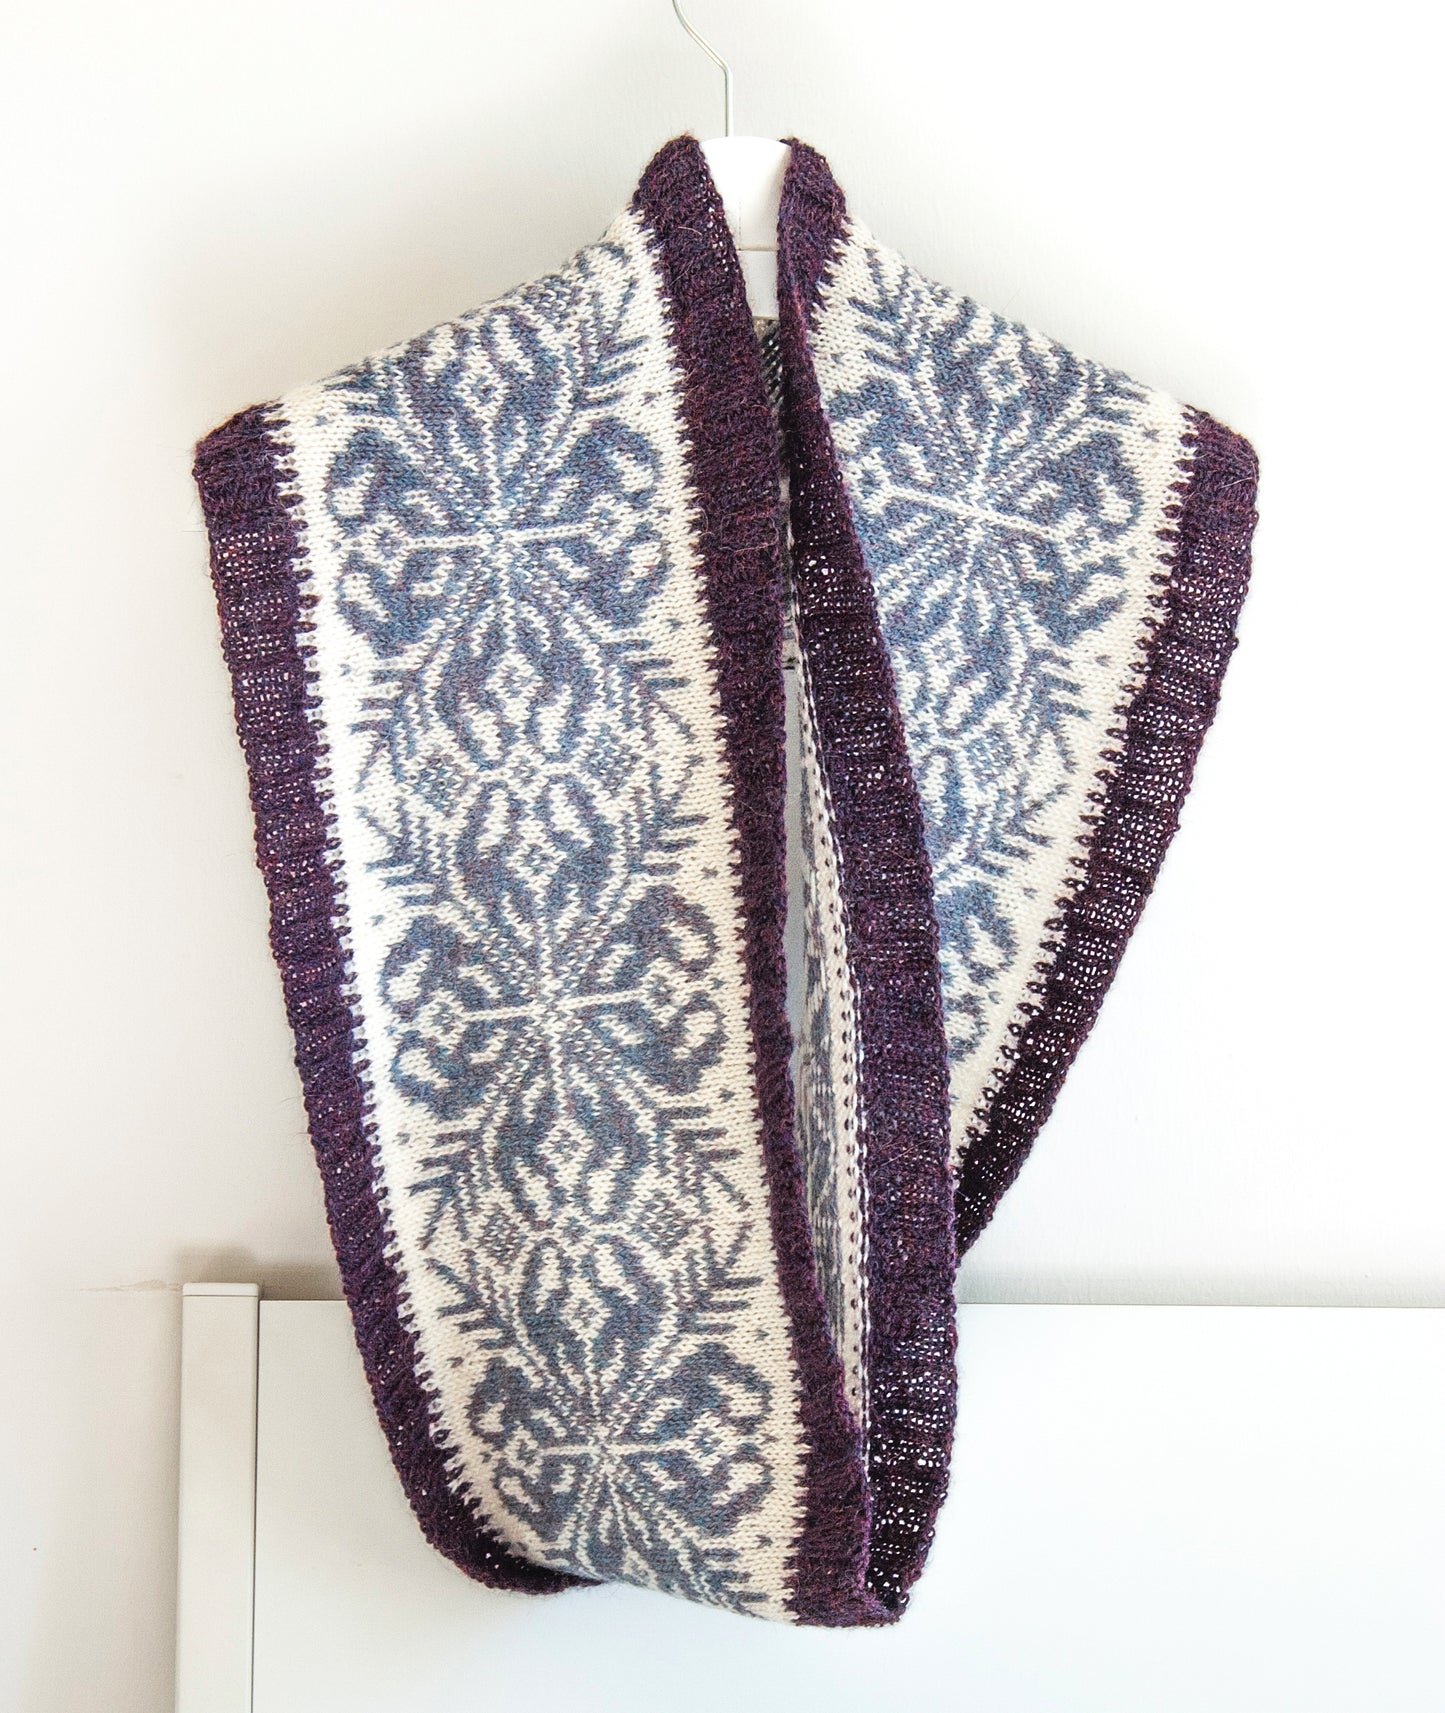 hand-knitted Fair Isle cowl  in Snowflake pattern made from purple and white alpaca wool yarn